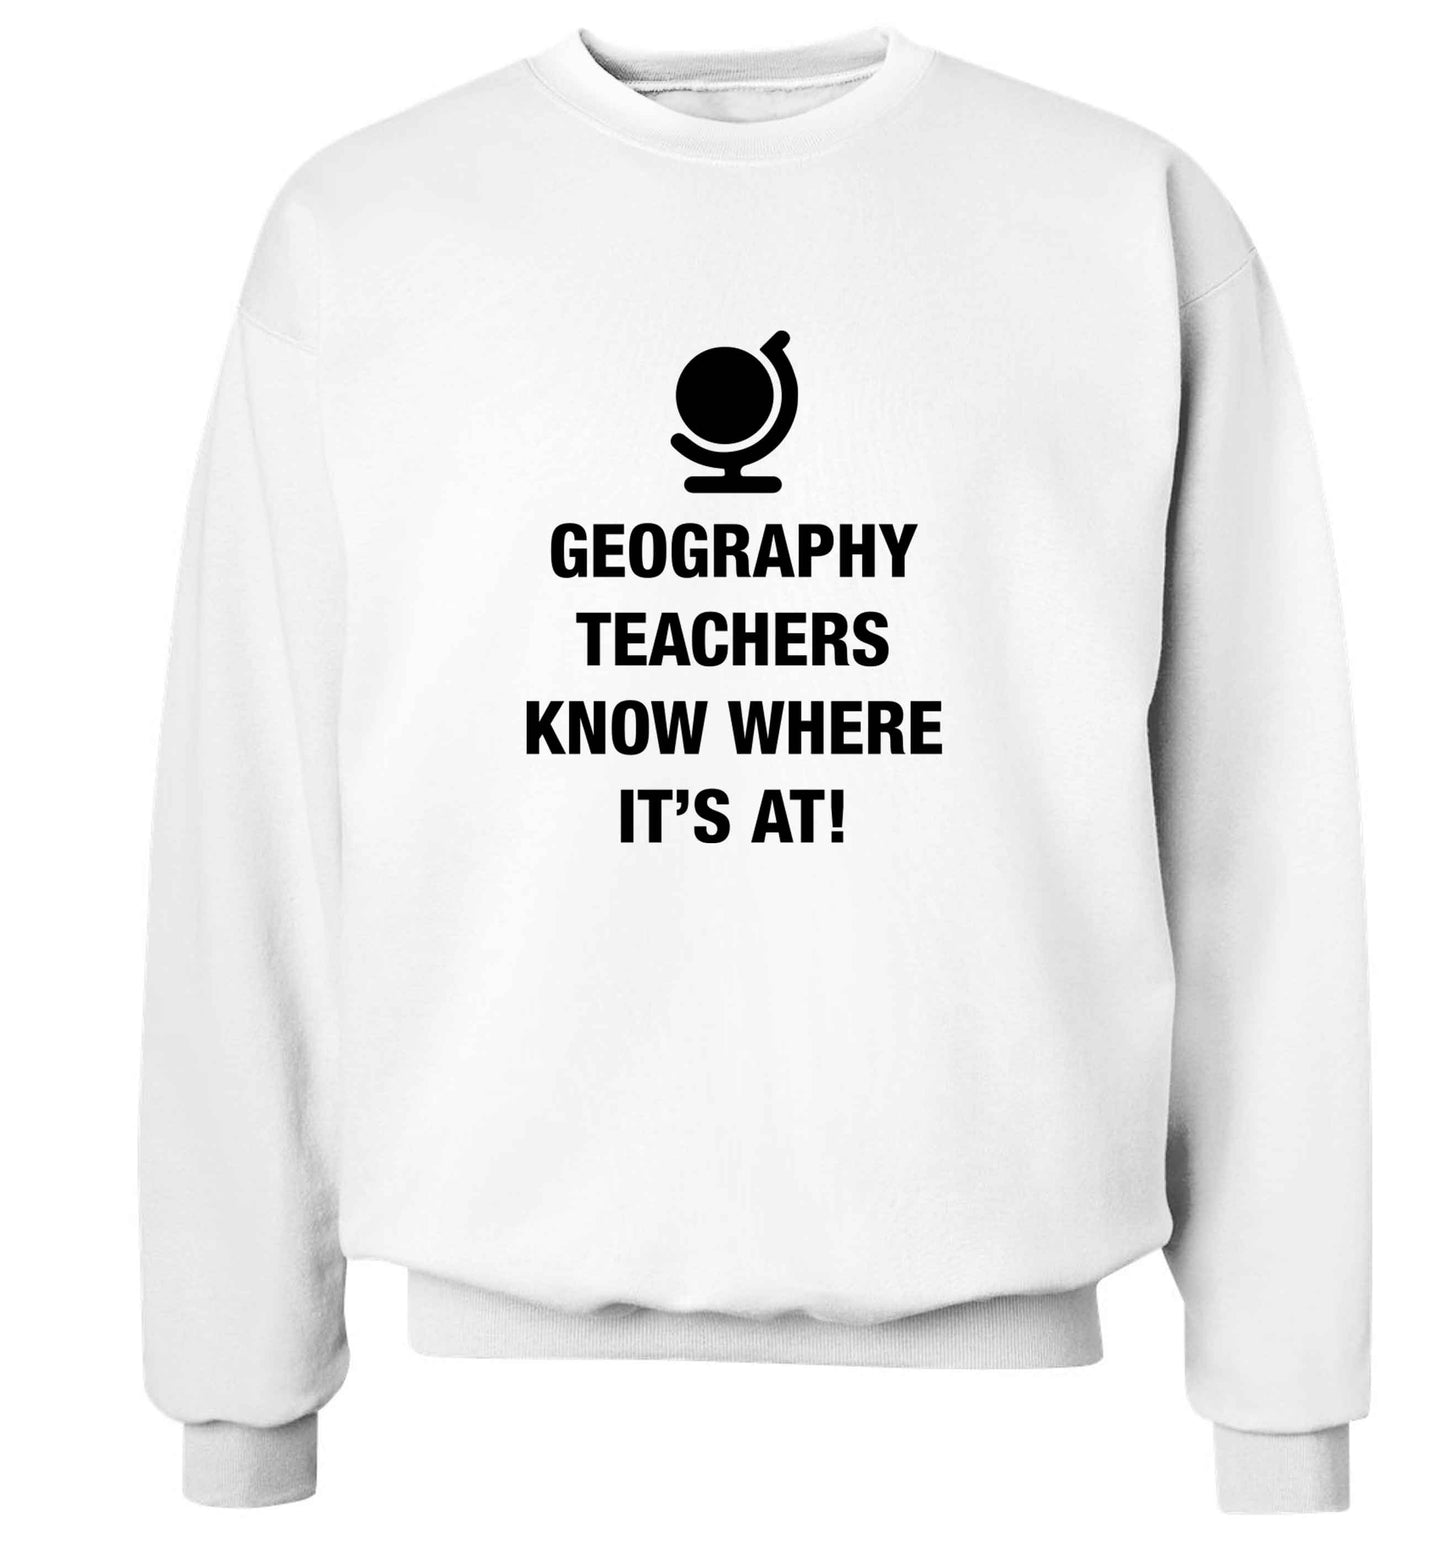 Geography teachers know where it's at adult's unisex white sweater 2XL